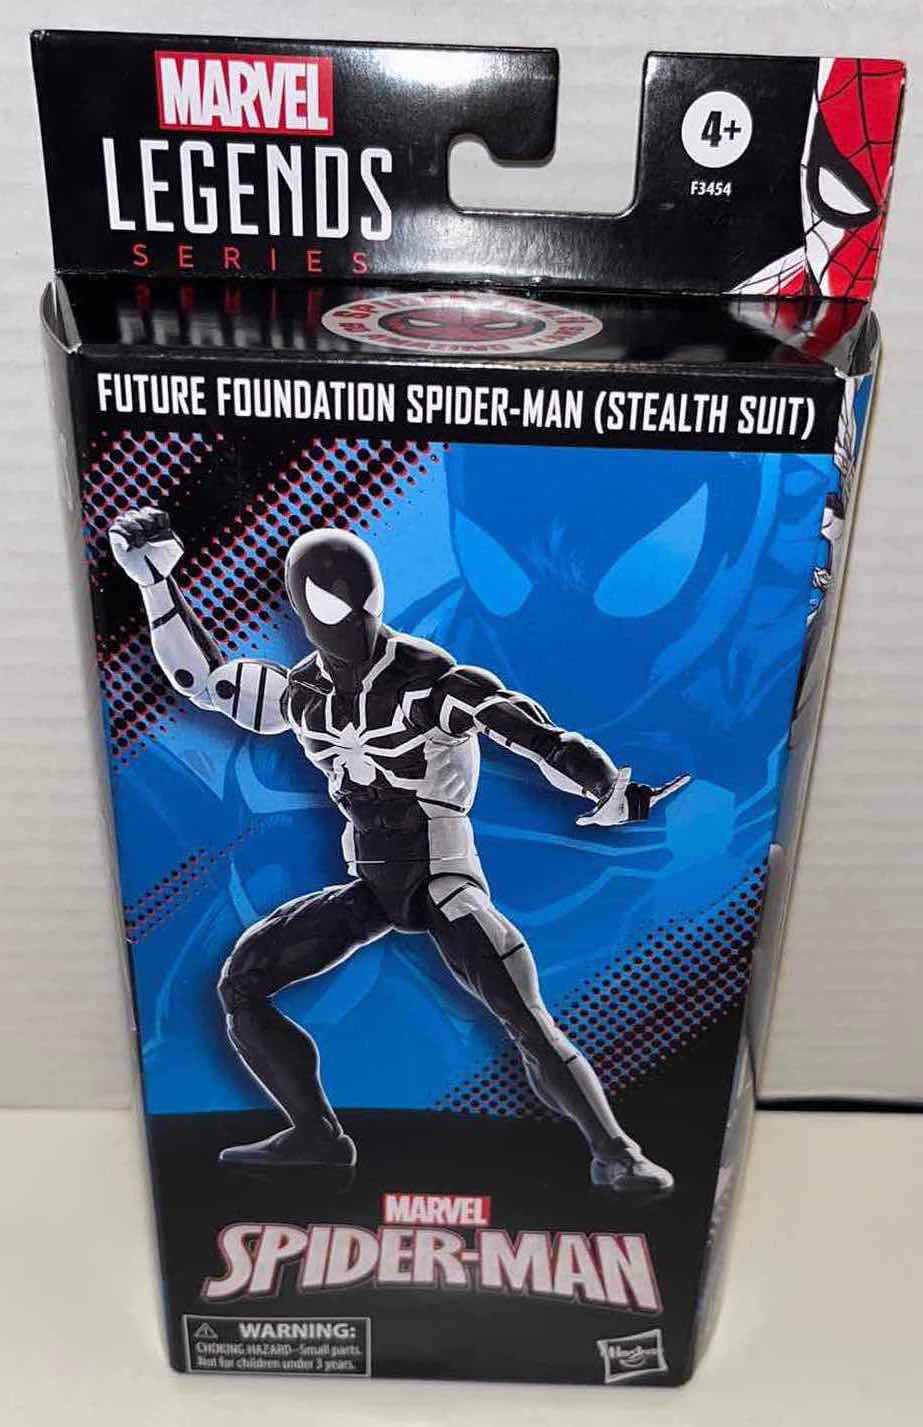 Photo 1 of NEW HASBRO MARVEL LEGEND SERIES ACTION FIGURE & ACCESSORIES, SPIDER-MAN  “FUTURE FOUNDATION SPIDER-MAN (STEALTH SUIT)” $30.00 (1)